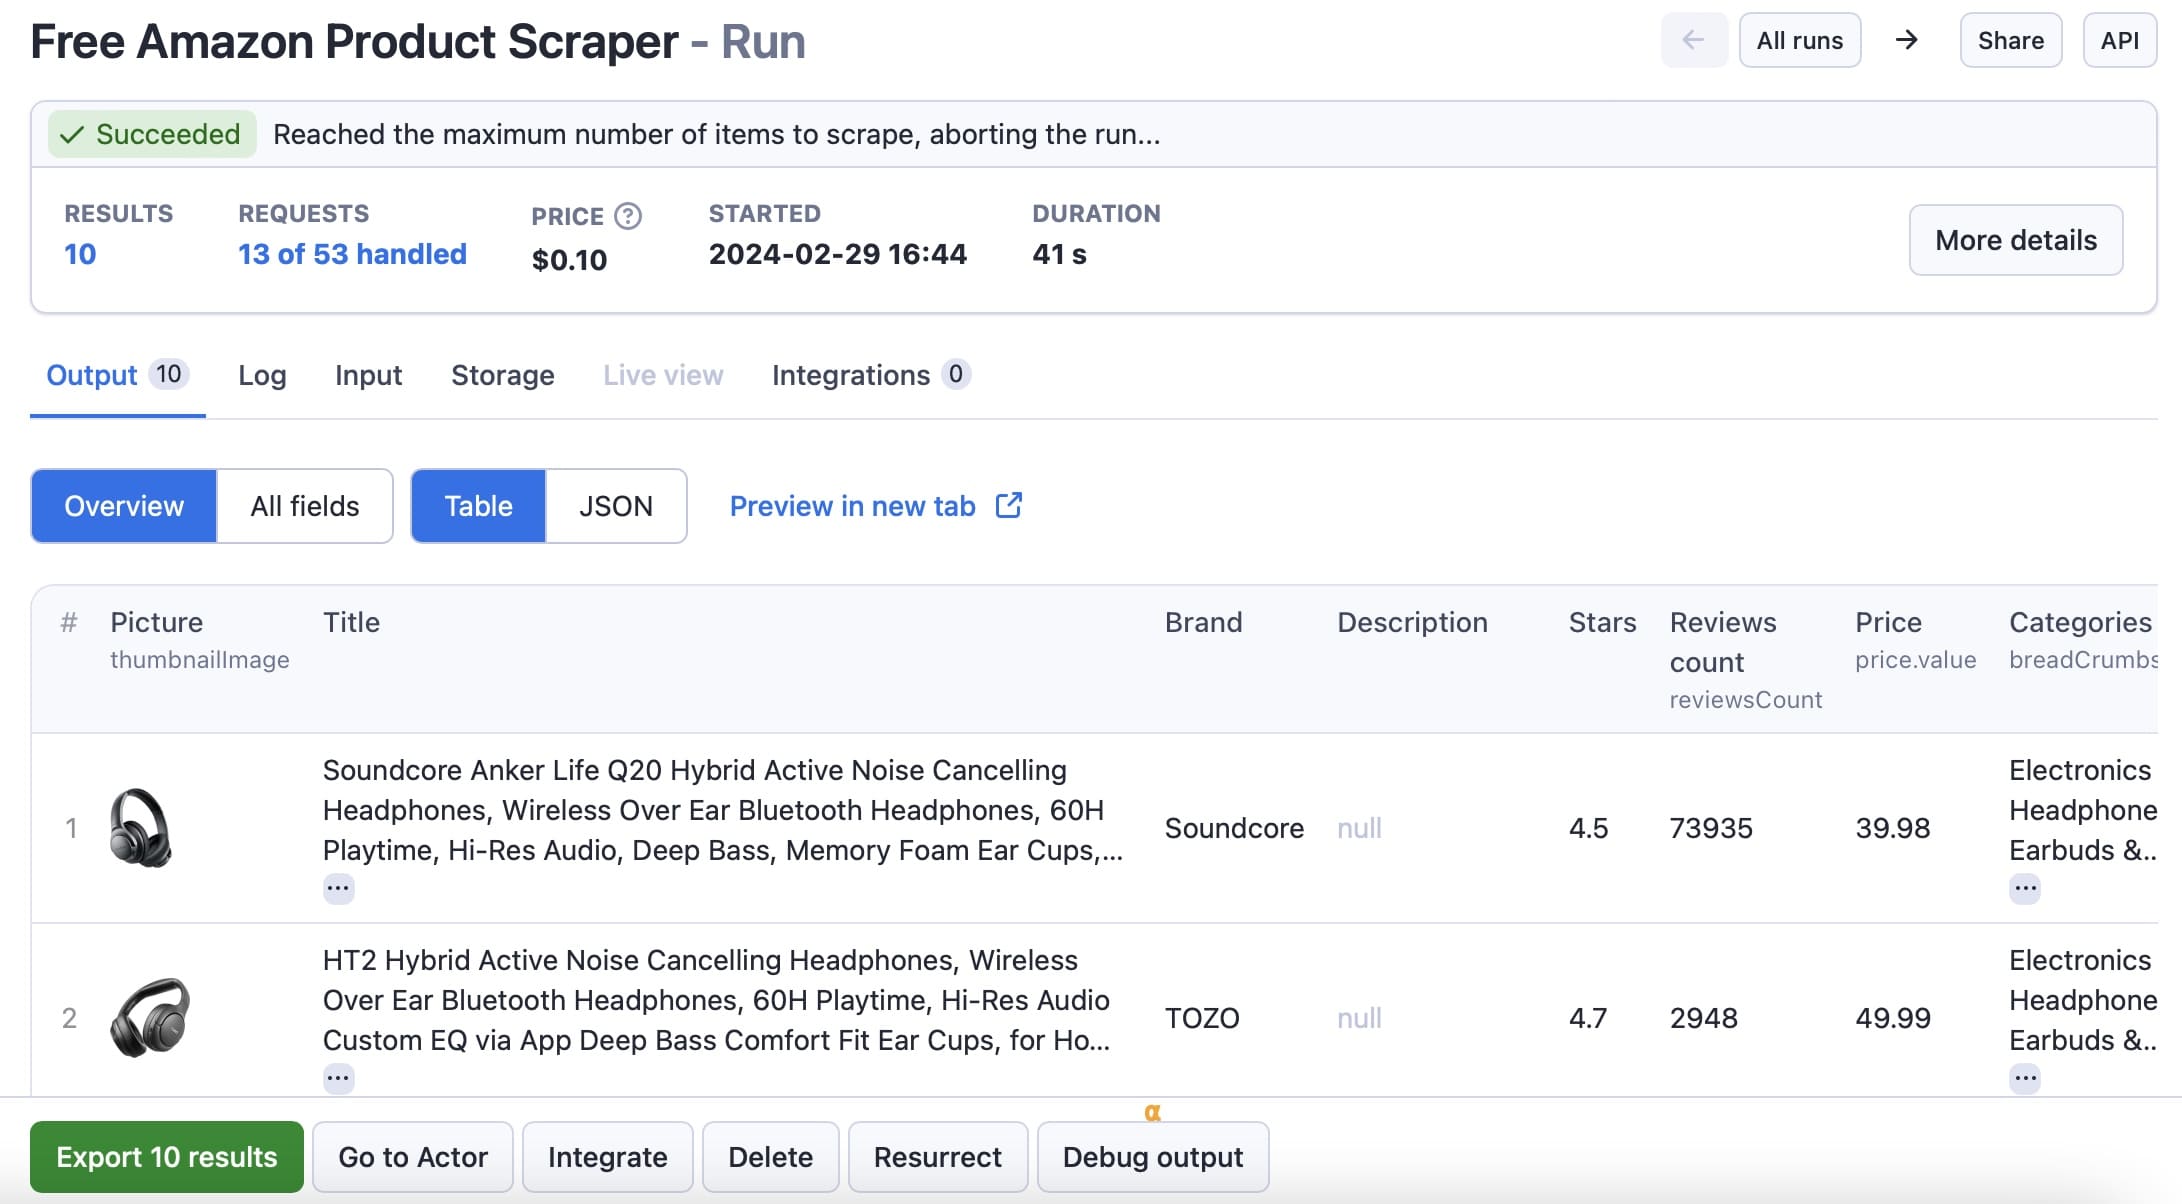 Screenshot of Amazon Product Scraper with a completed run